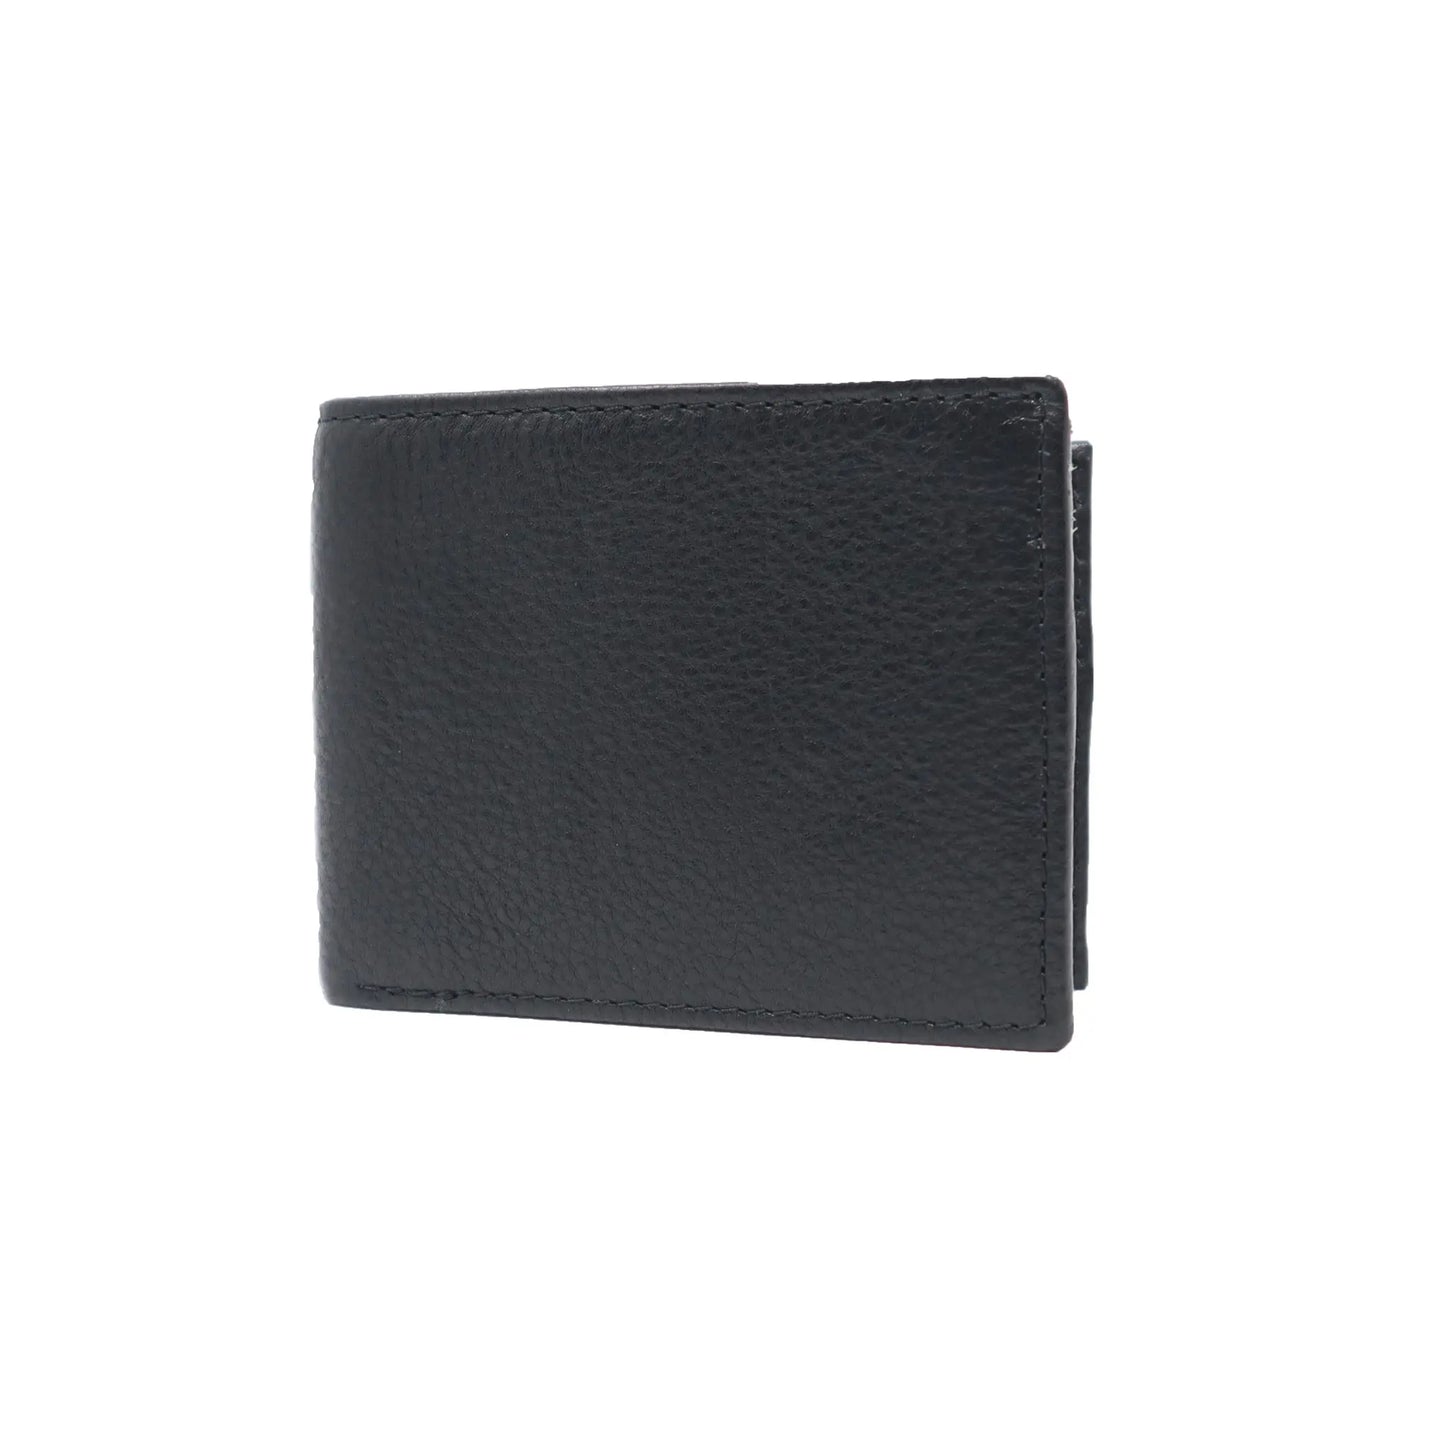 Simple Black Leather Wallet - Larimars Clothing Men's Formal and casual wear shirts